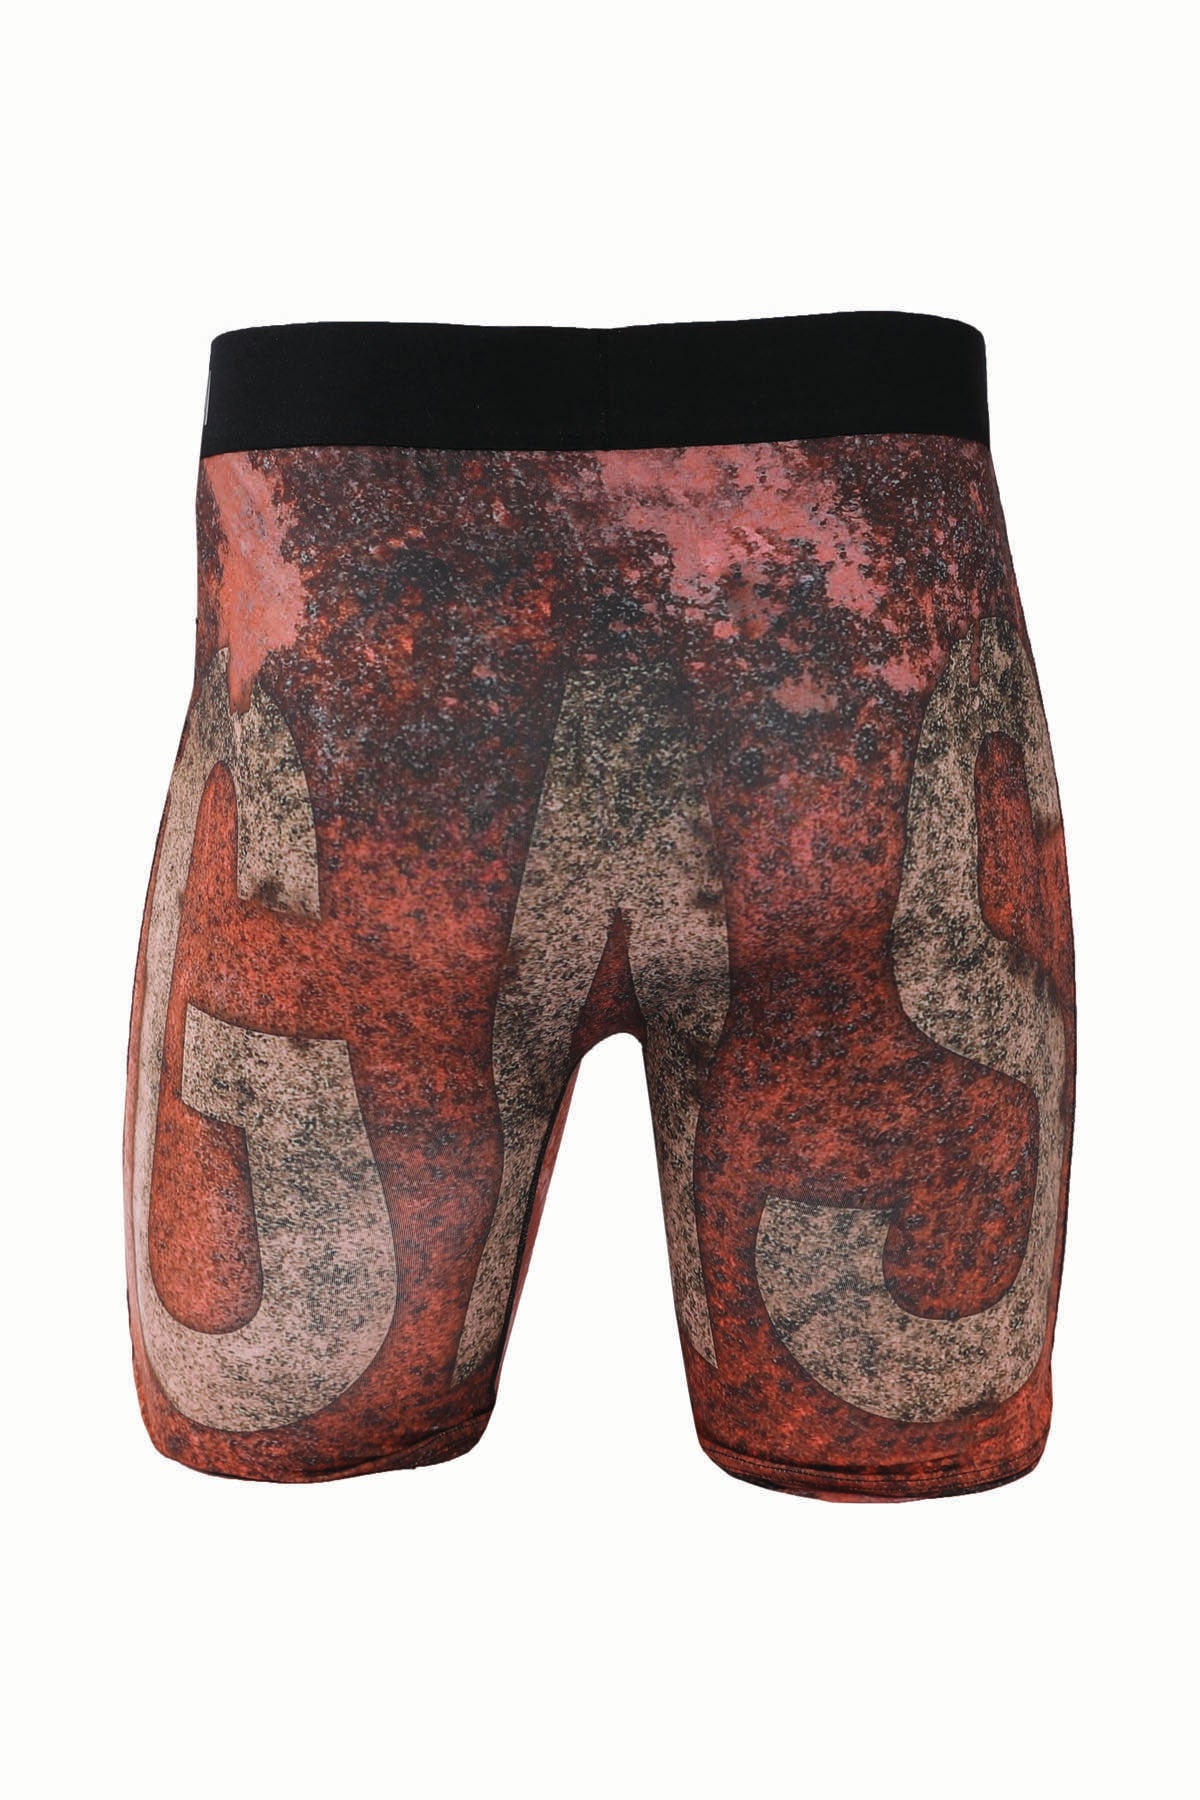 CINCH Men's Oil and Gas Boxer